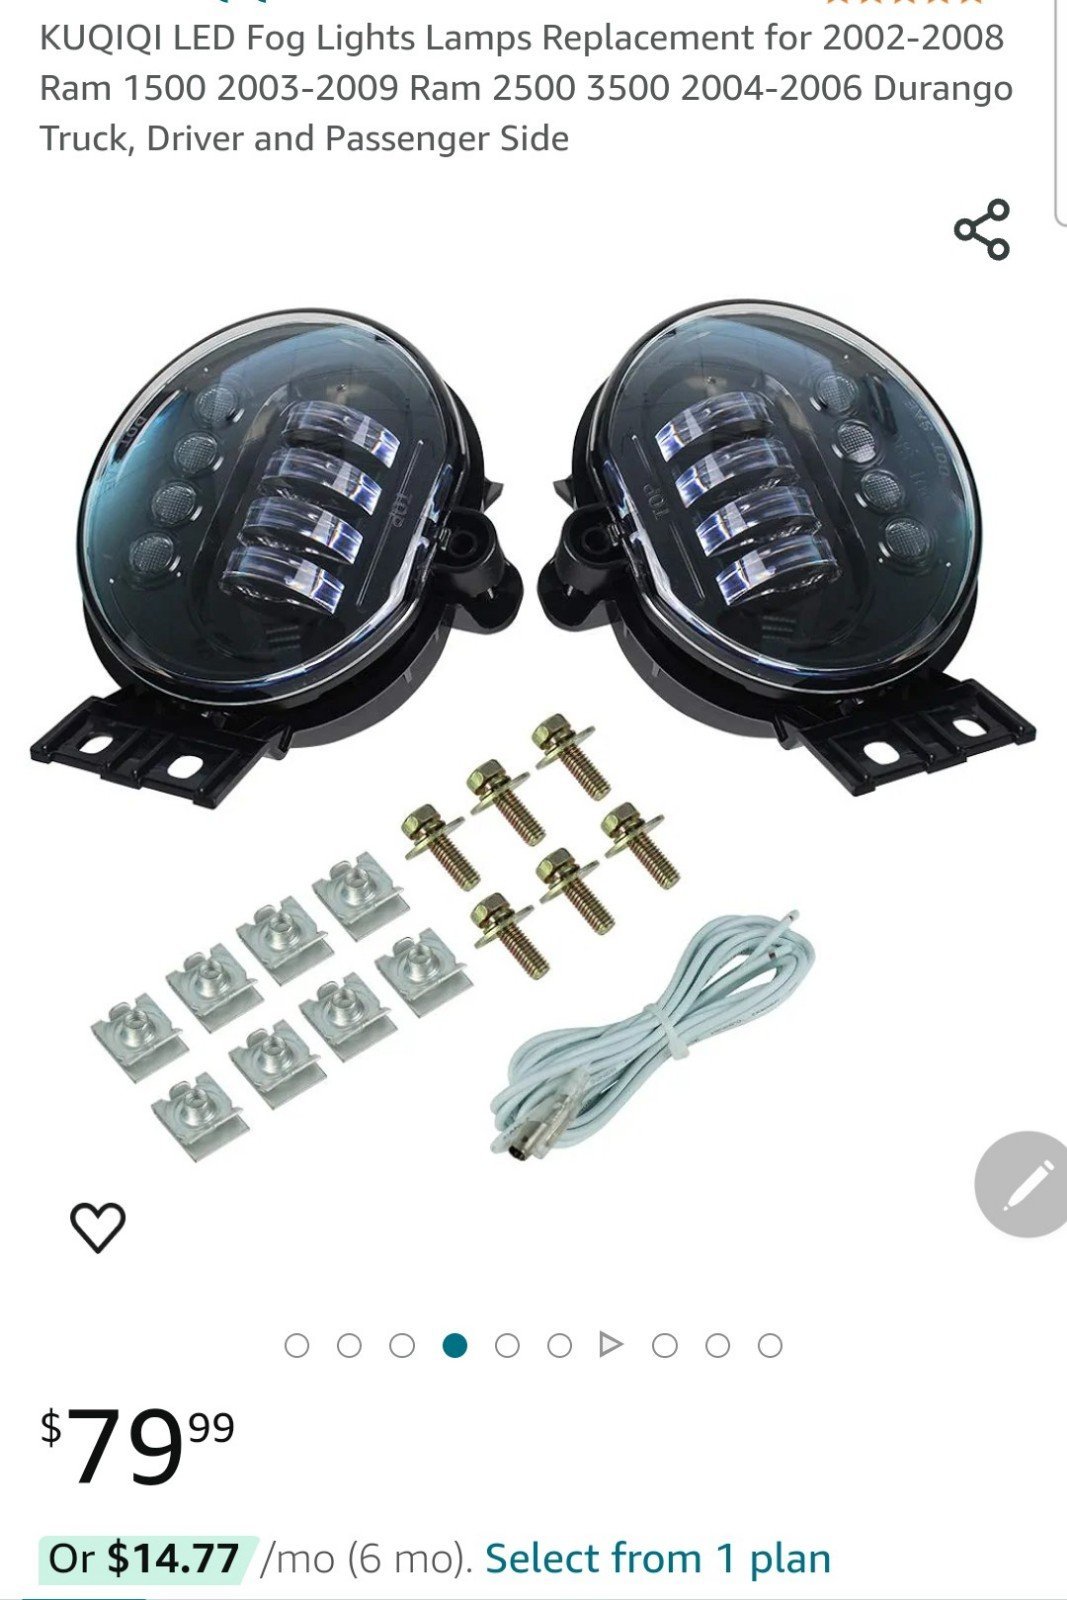 LED Fog Lights Lamps Replacement for 02 to 08 Ram 1500 